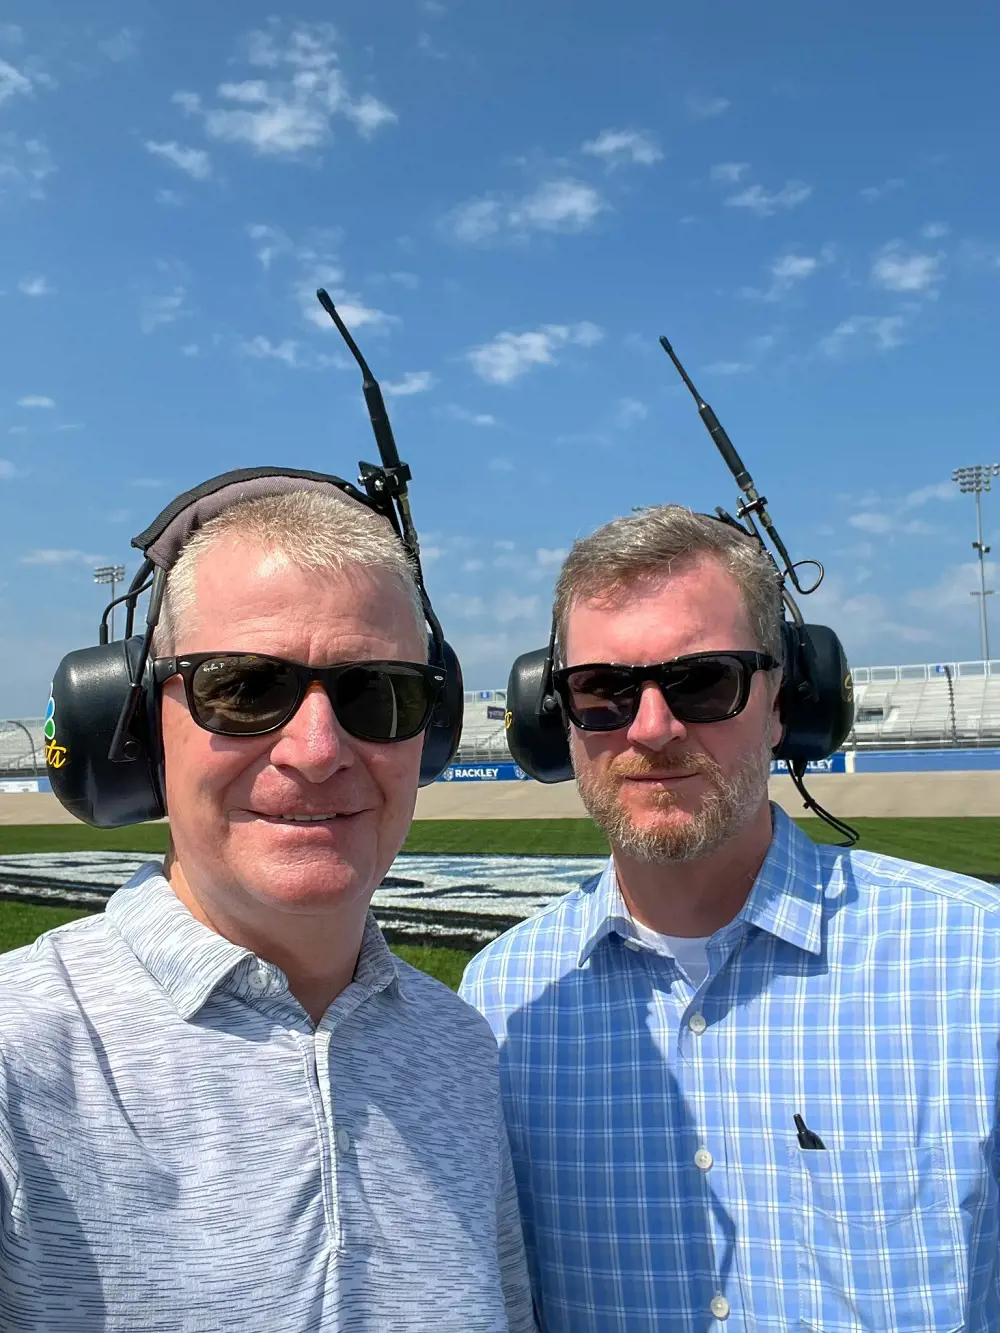 Jeff Burton and Dale Earnhardt Jr. make time for a selfie during the Xfinity Series broadcast